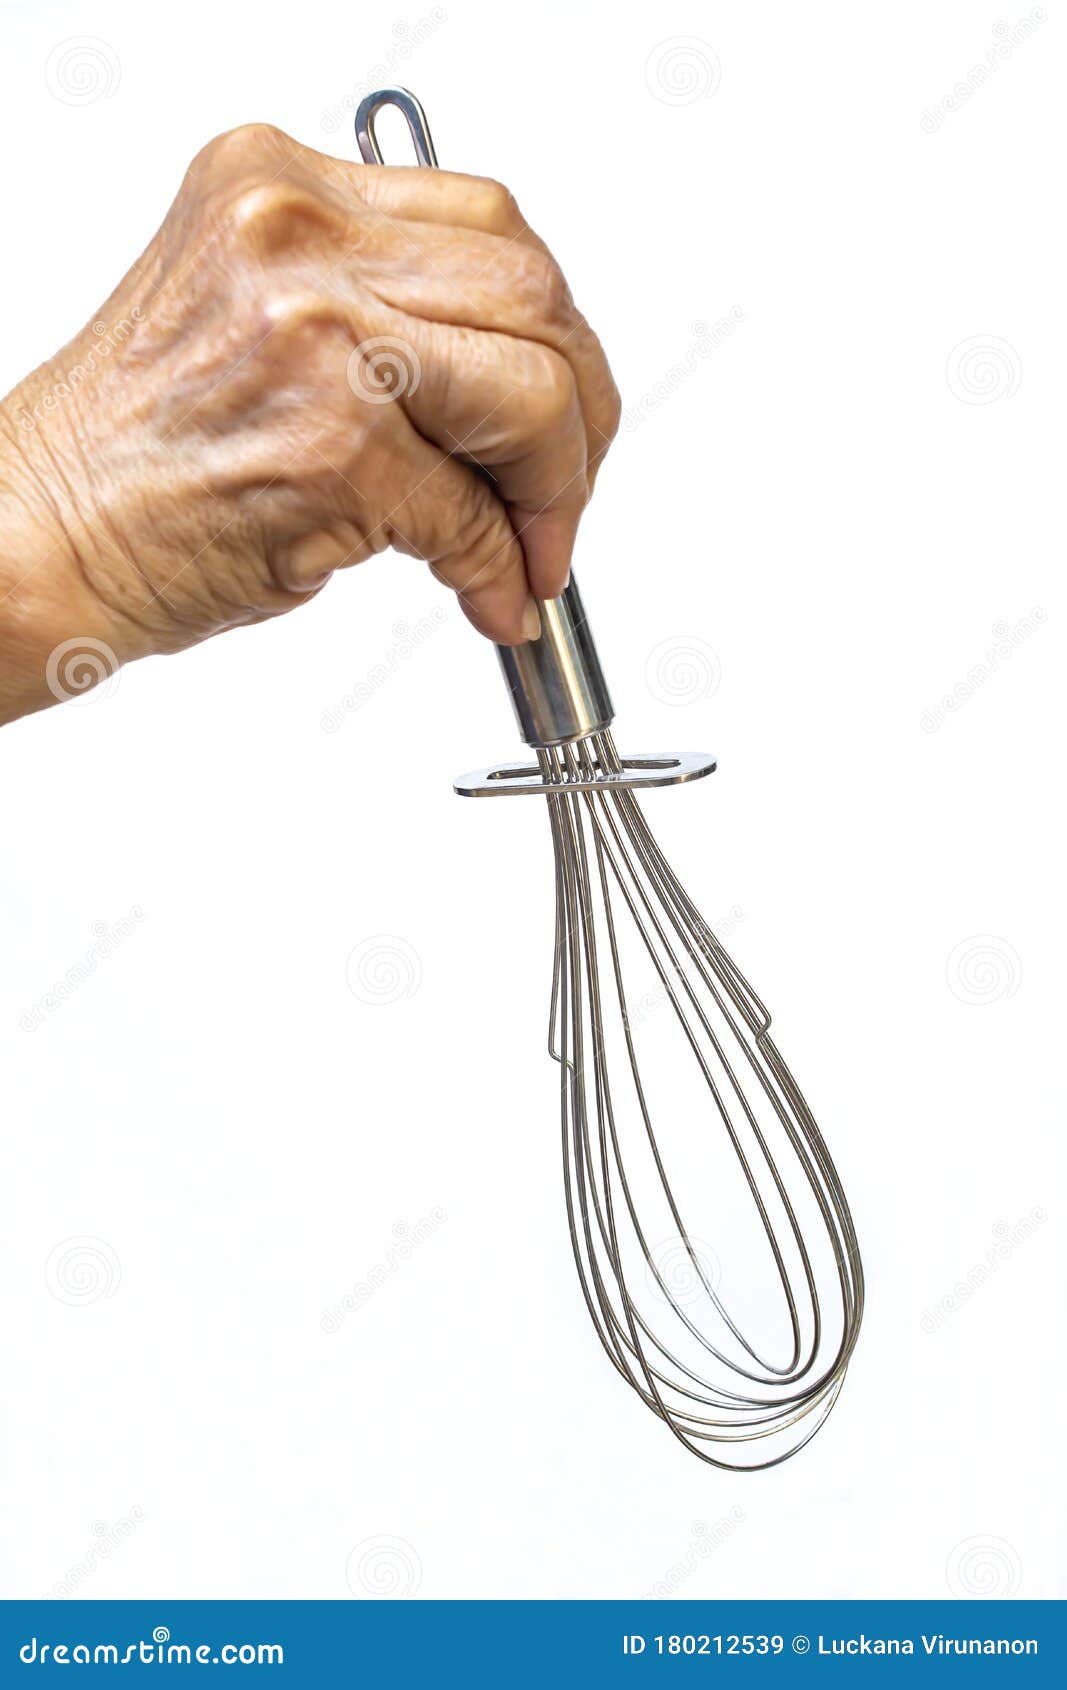 Hand Holding Whisk Photos and Images